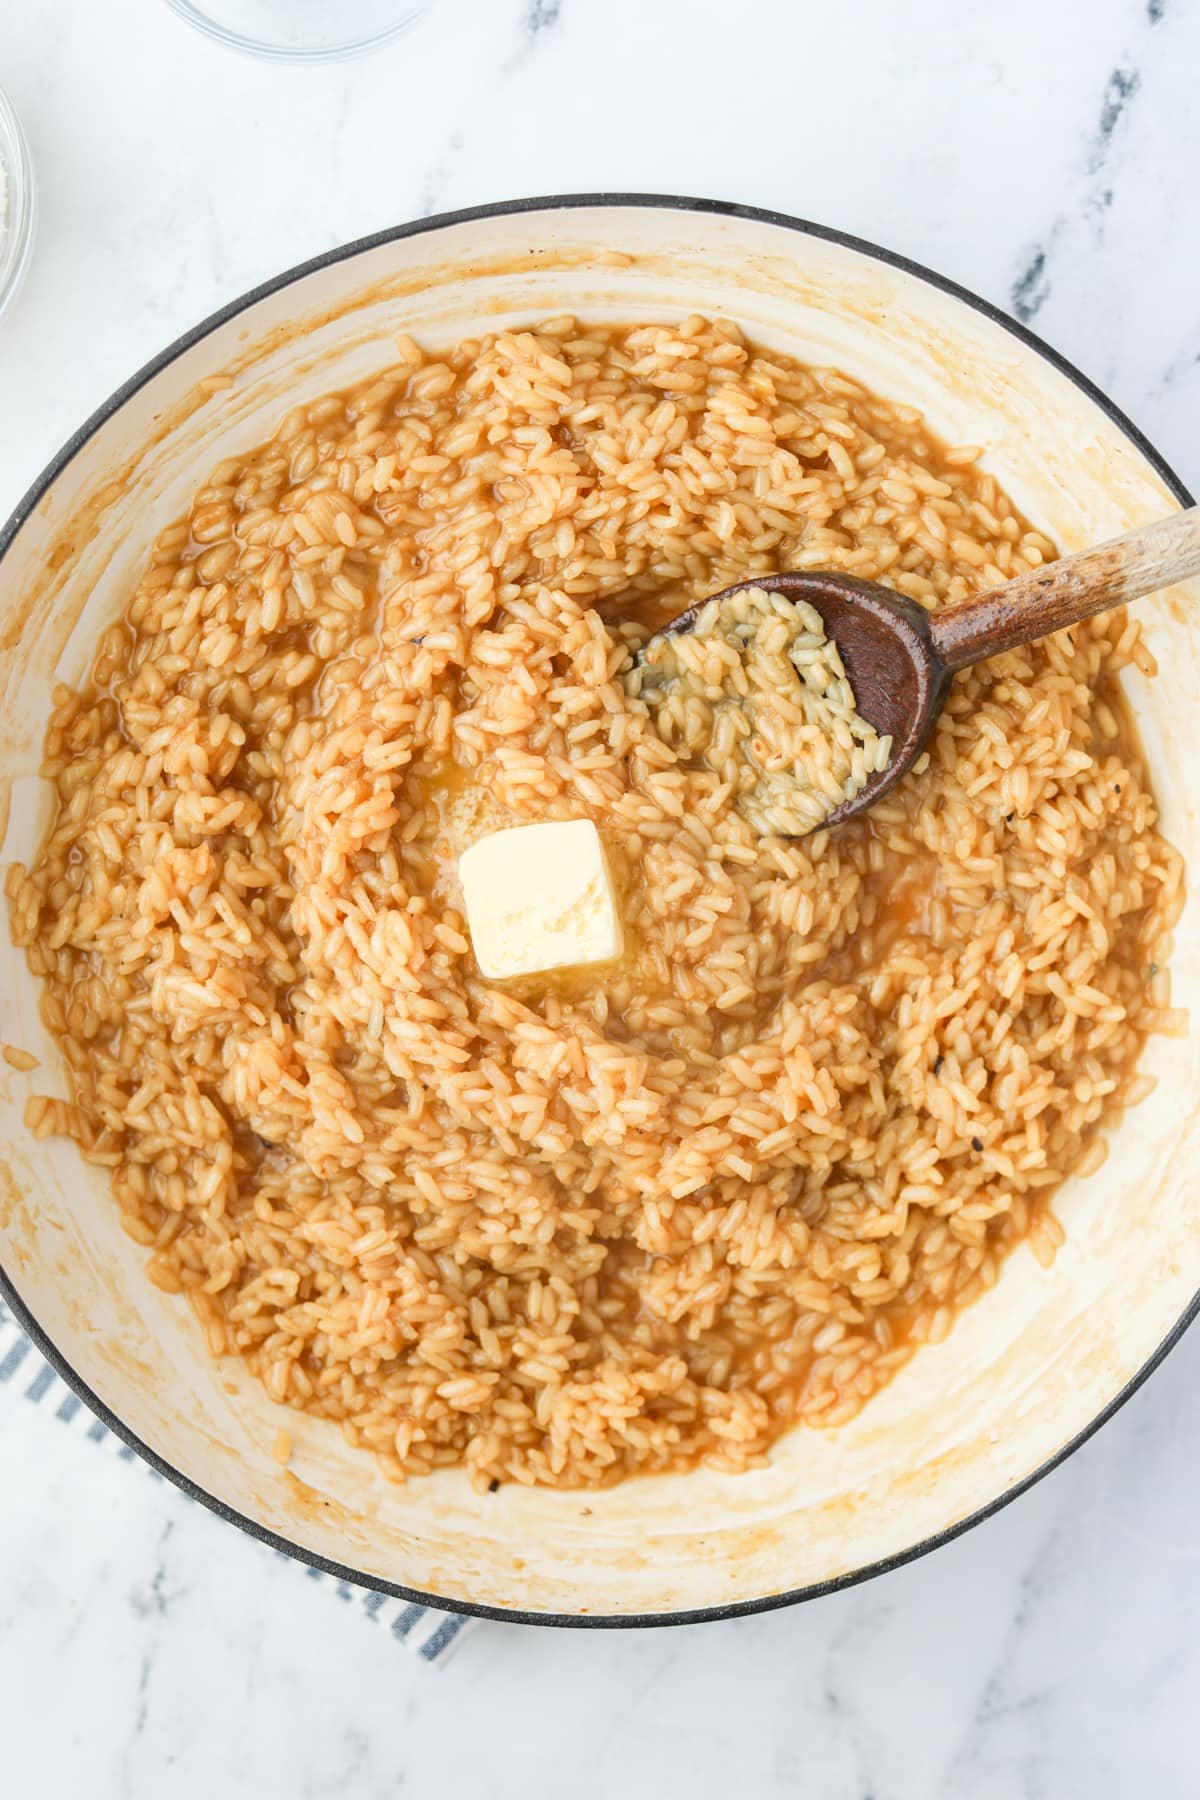 A skillet filled with risotto and topped with a pat of butter.